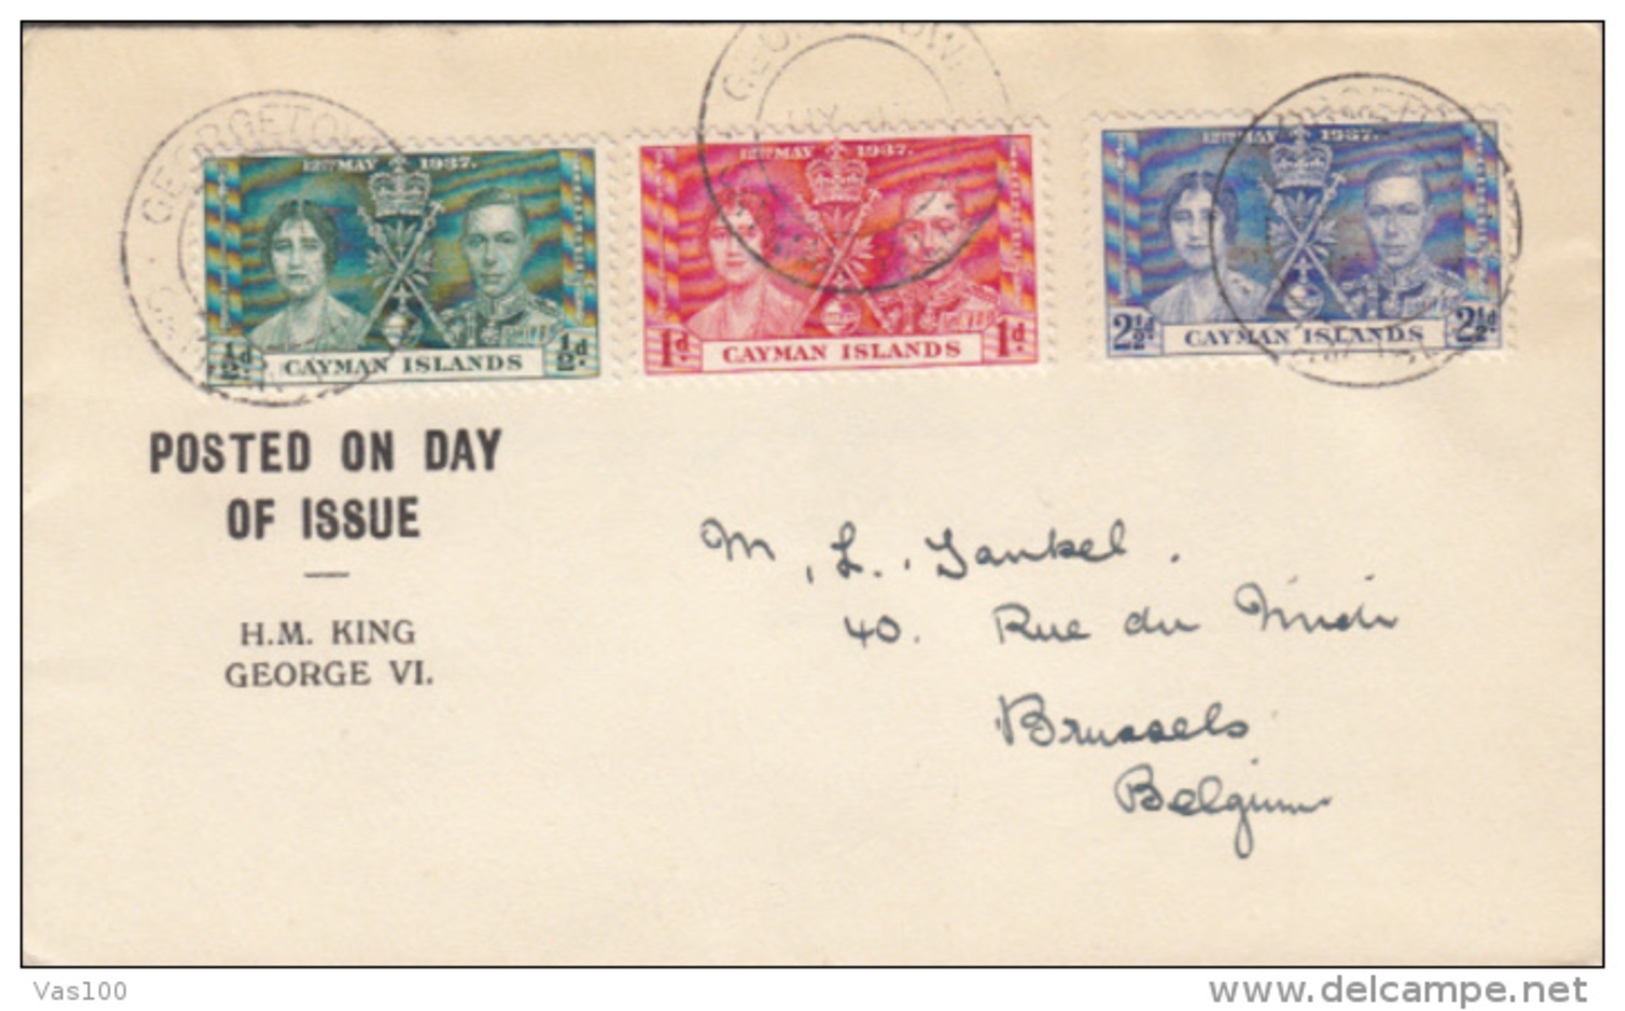 KING GEORGE VI AND QUEEN ELISABETH CORONATION, STAMPS ON COVER, 1937, BASUTOLAND - 1933-1964 Colonia Británica